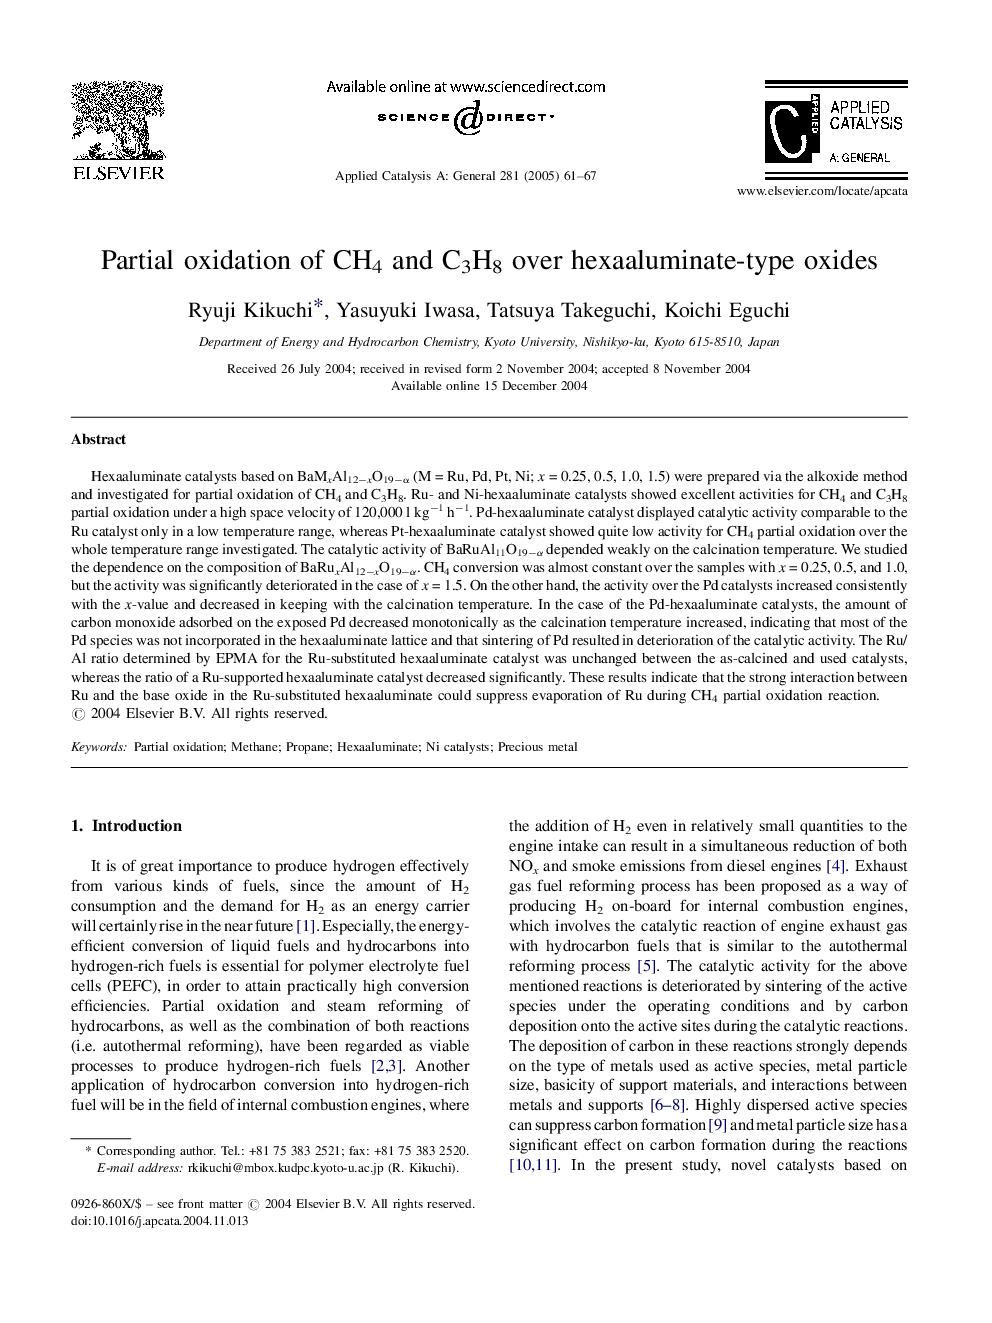 Partial oxidation of CH4 and C3H8 over hexaaluminate-type oxides